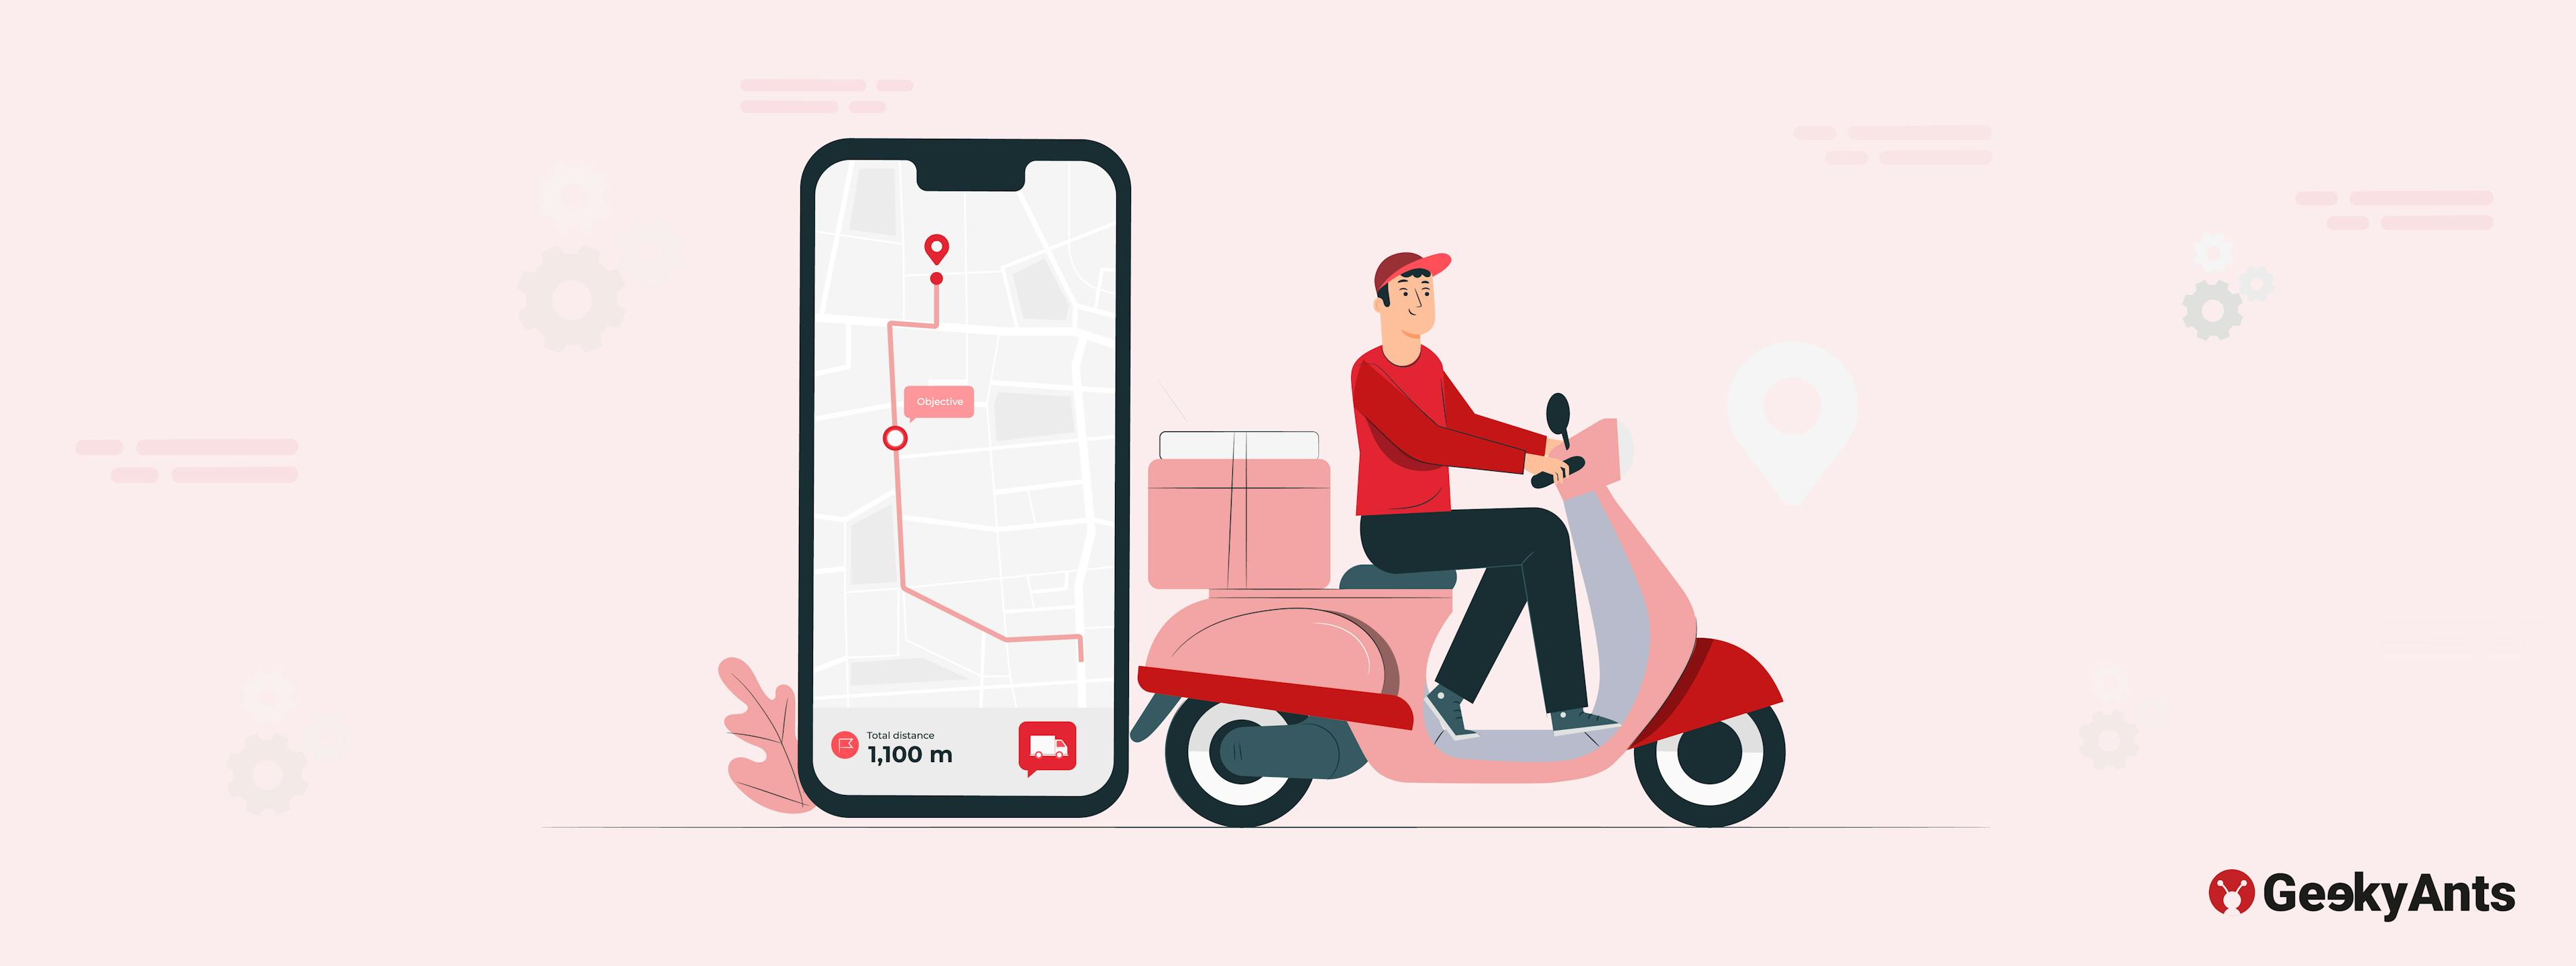 How to Build an Online Delivery App Like Uber Eats